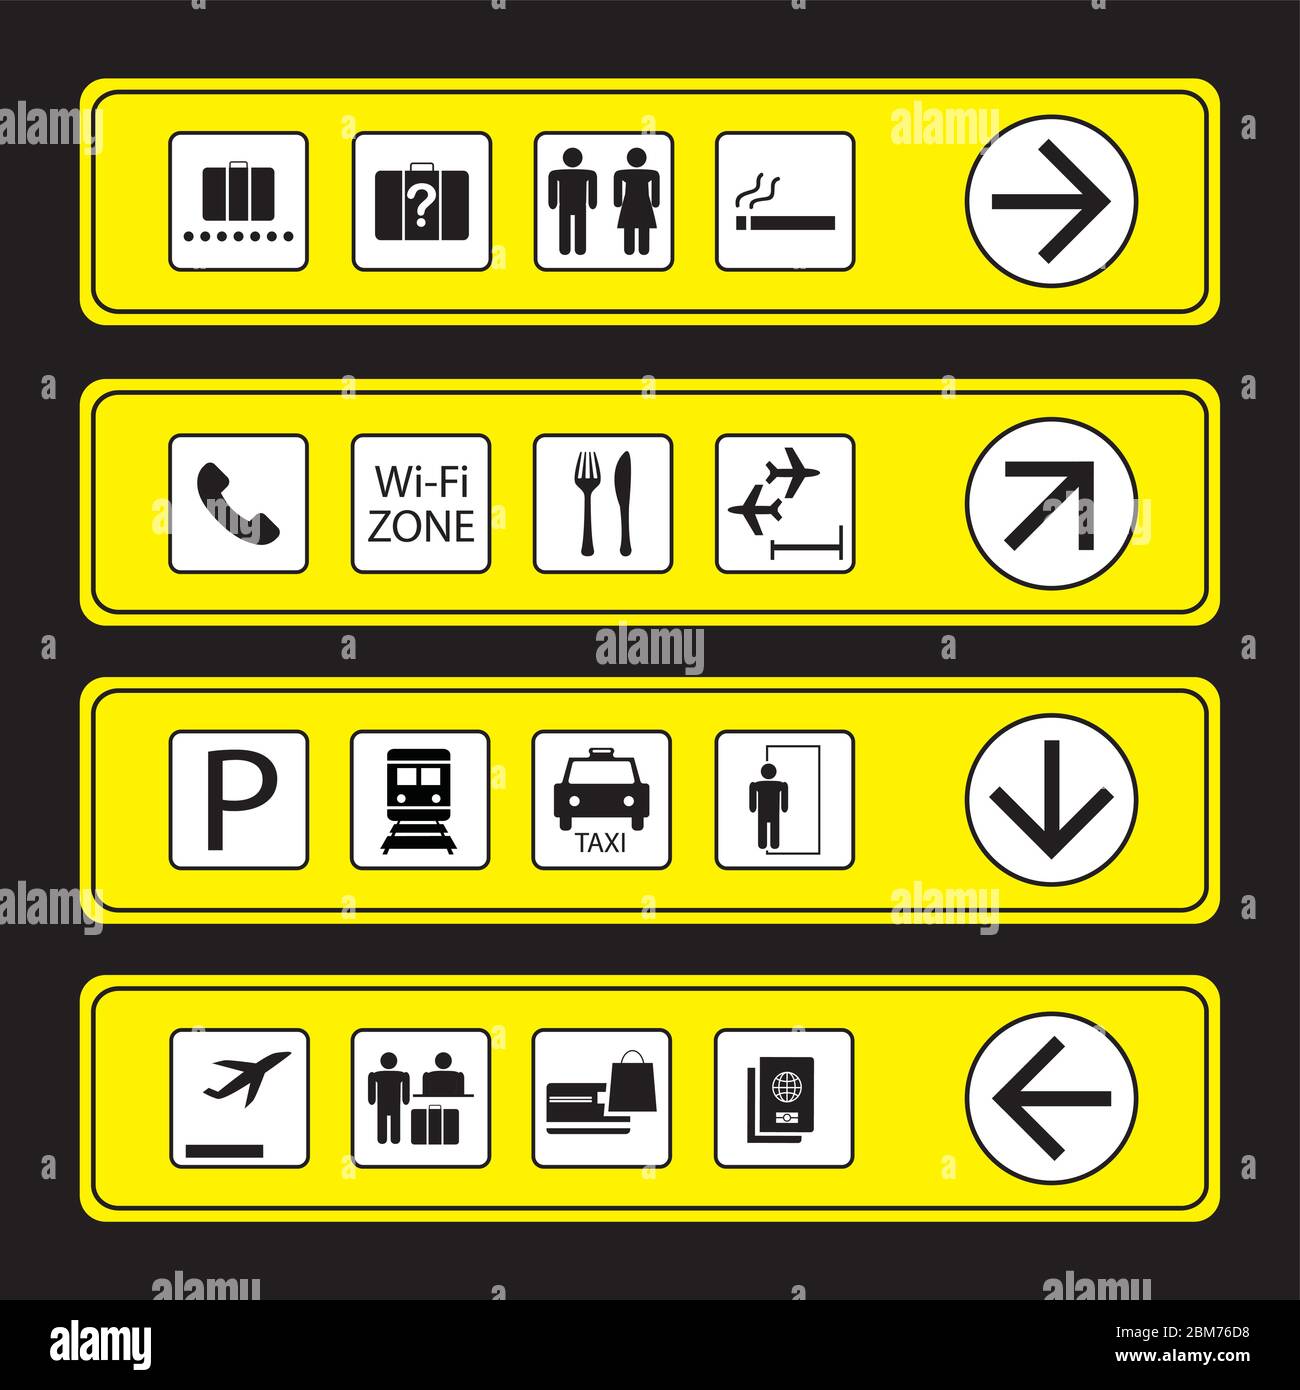 Set of Airport Signs with icons,vector illustration. Stock Vector